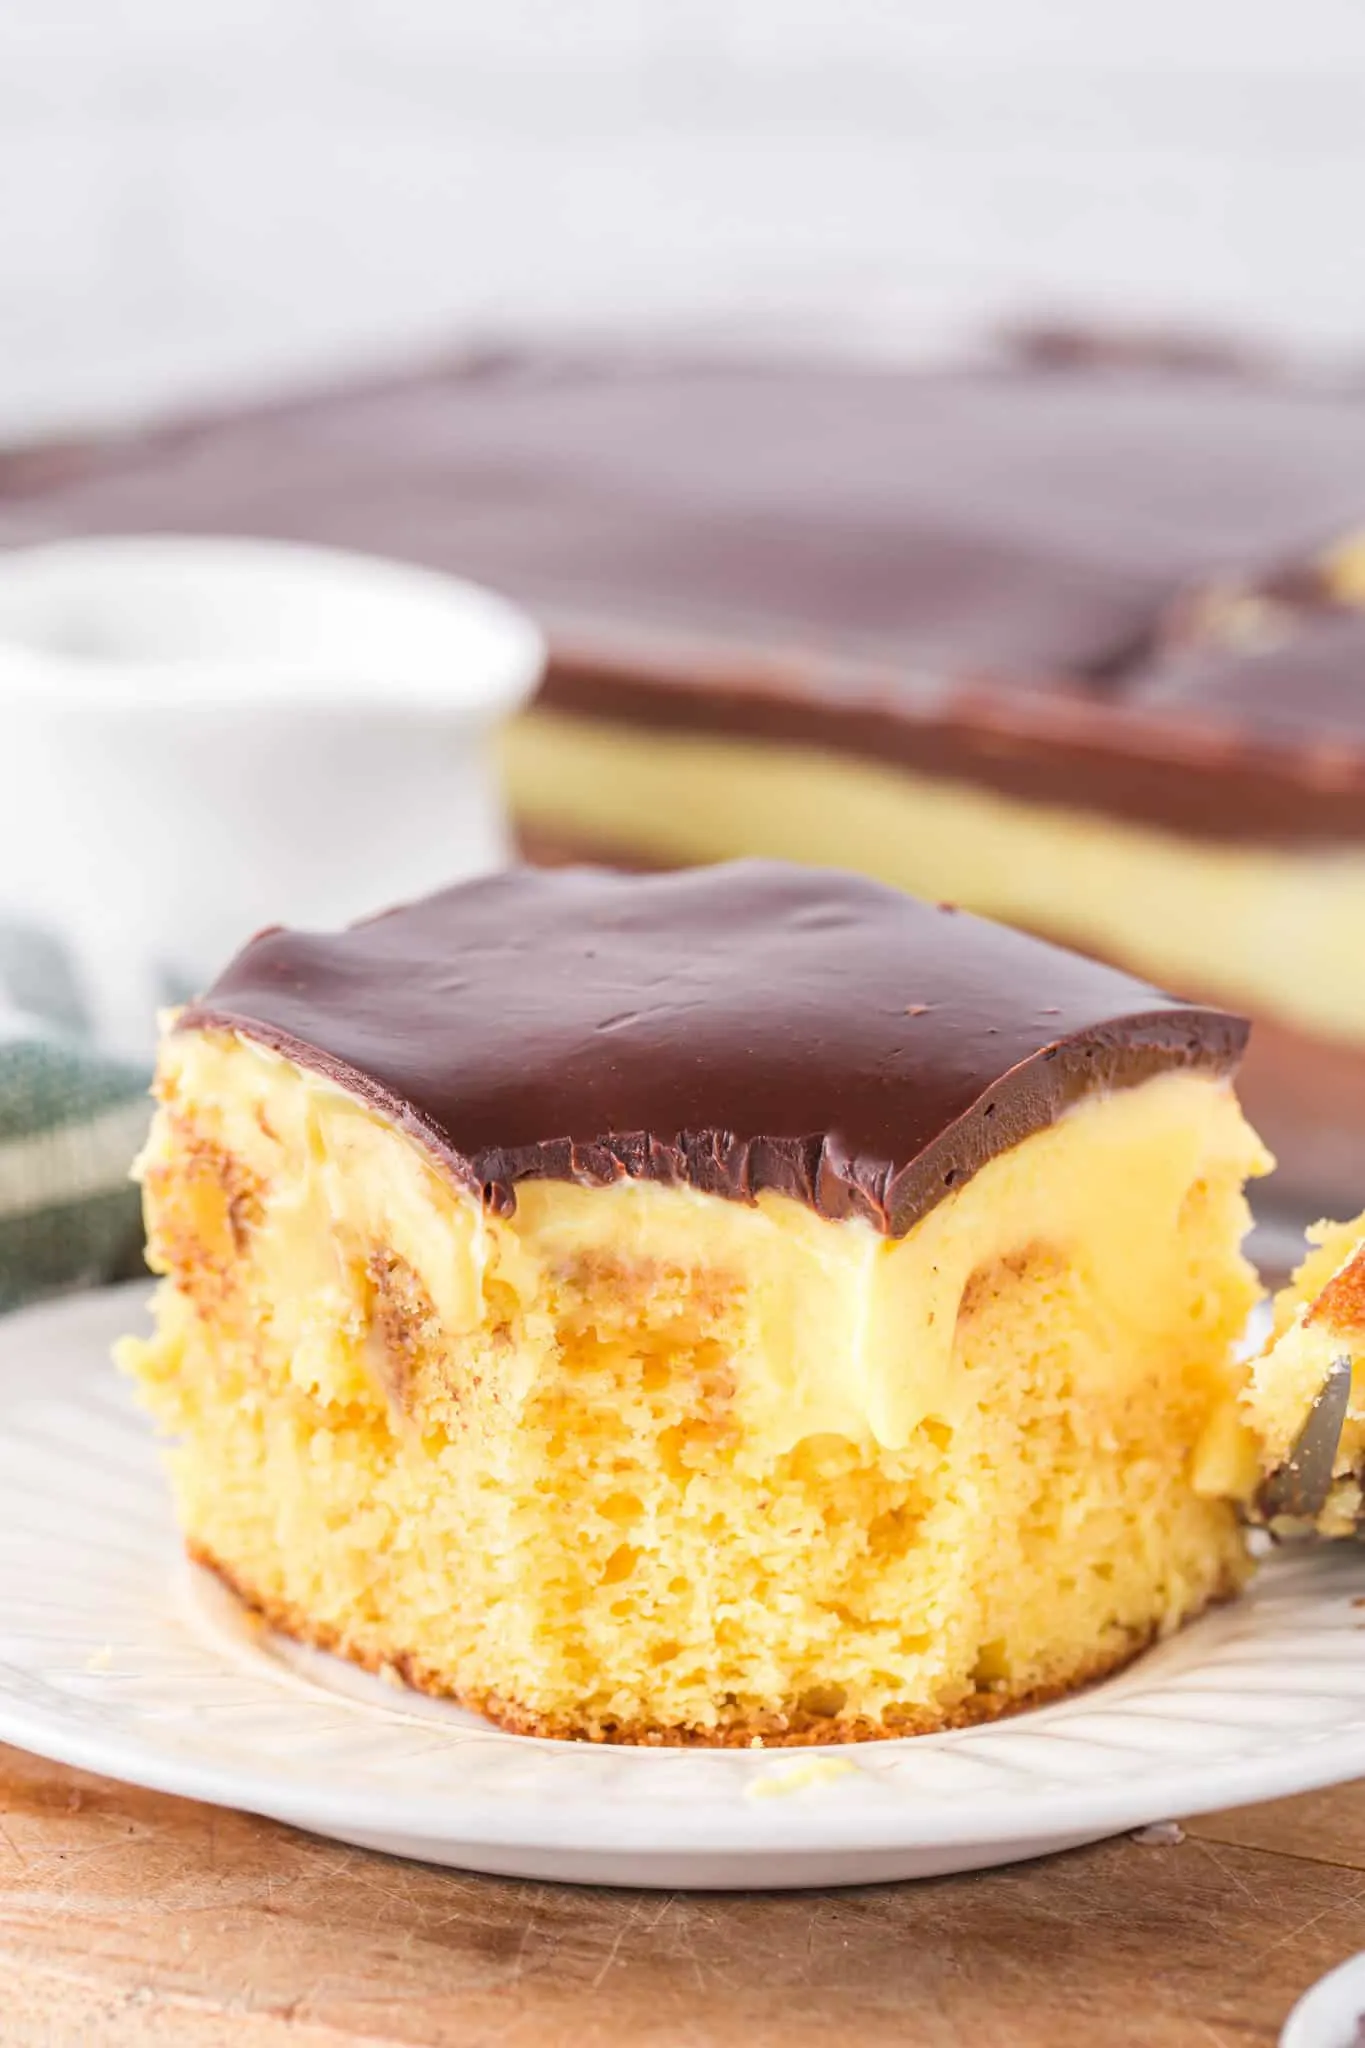 Boston Cream Poke Cake is a moist and delicious dessert recipe made with boxed yellow cake mix covered in creamy vanilla pudding and topped with chocolate ganache.